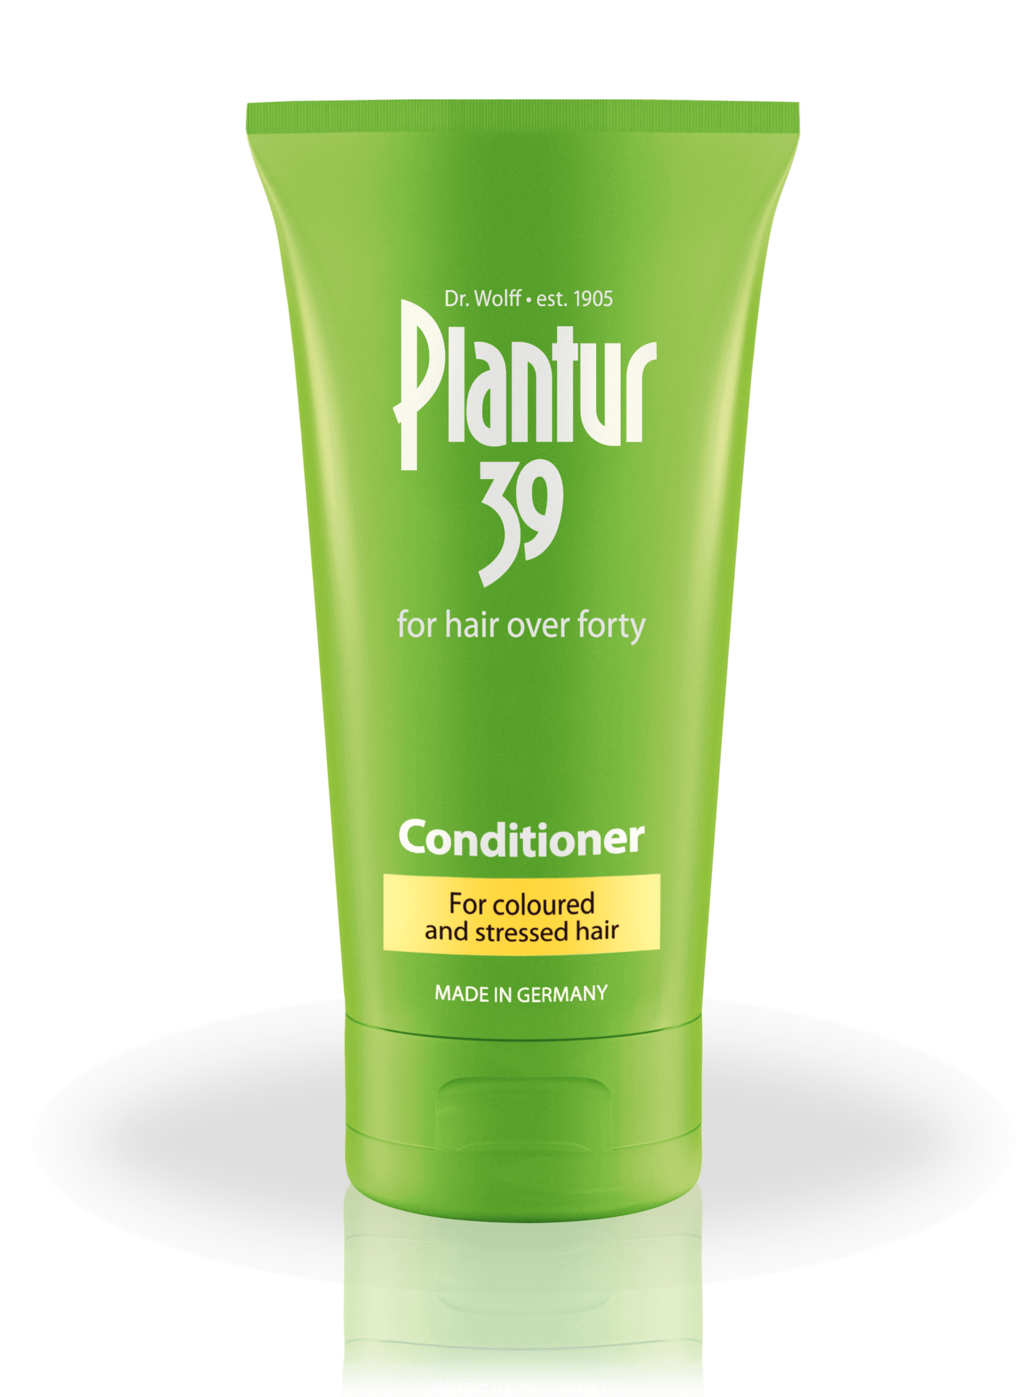 Plantur 39 Conditioner for Coloured and Stressed Hair 150ml